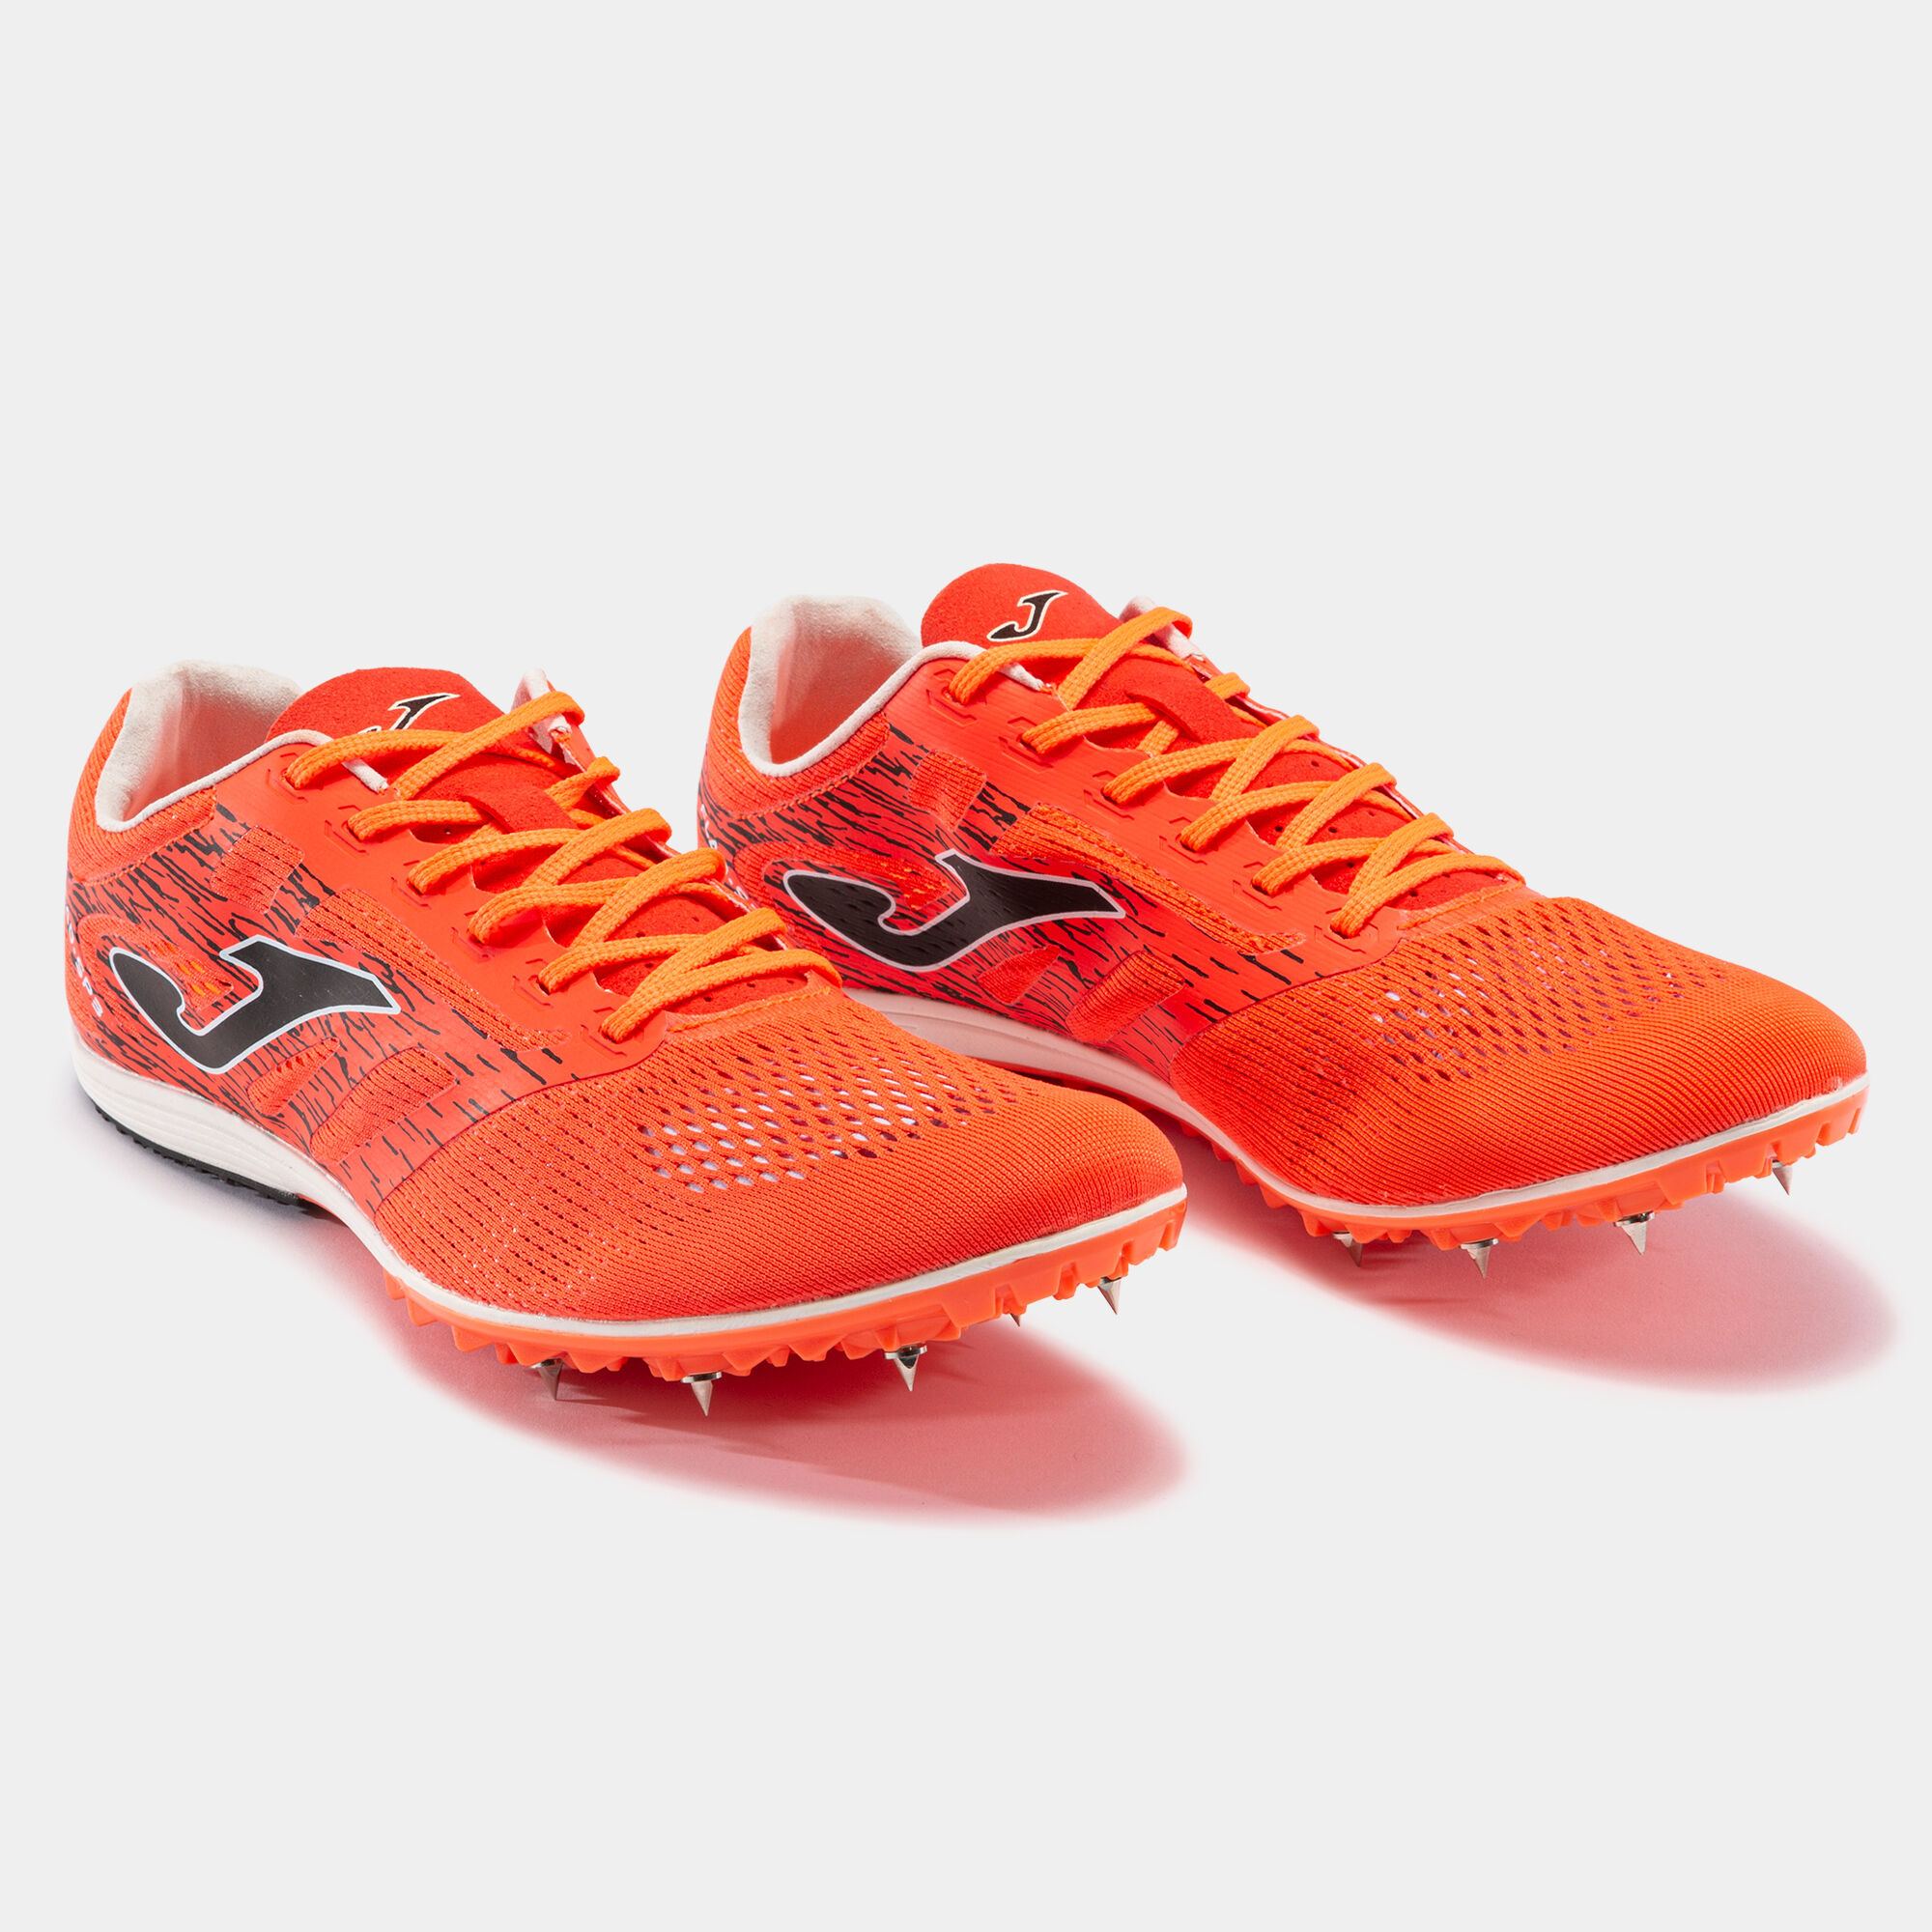 Chaussures running Flad 21 pointes homme corail